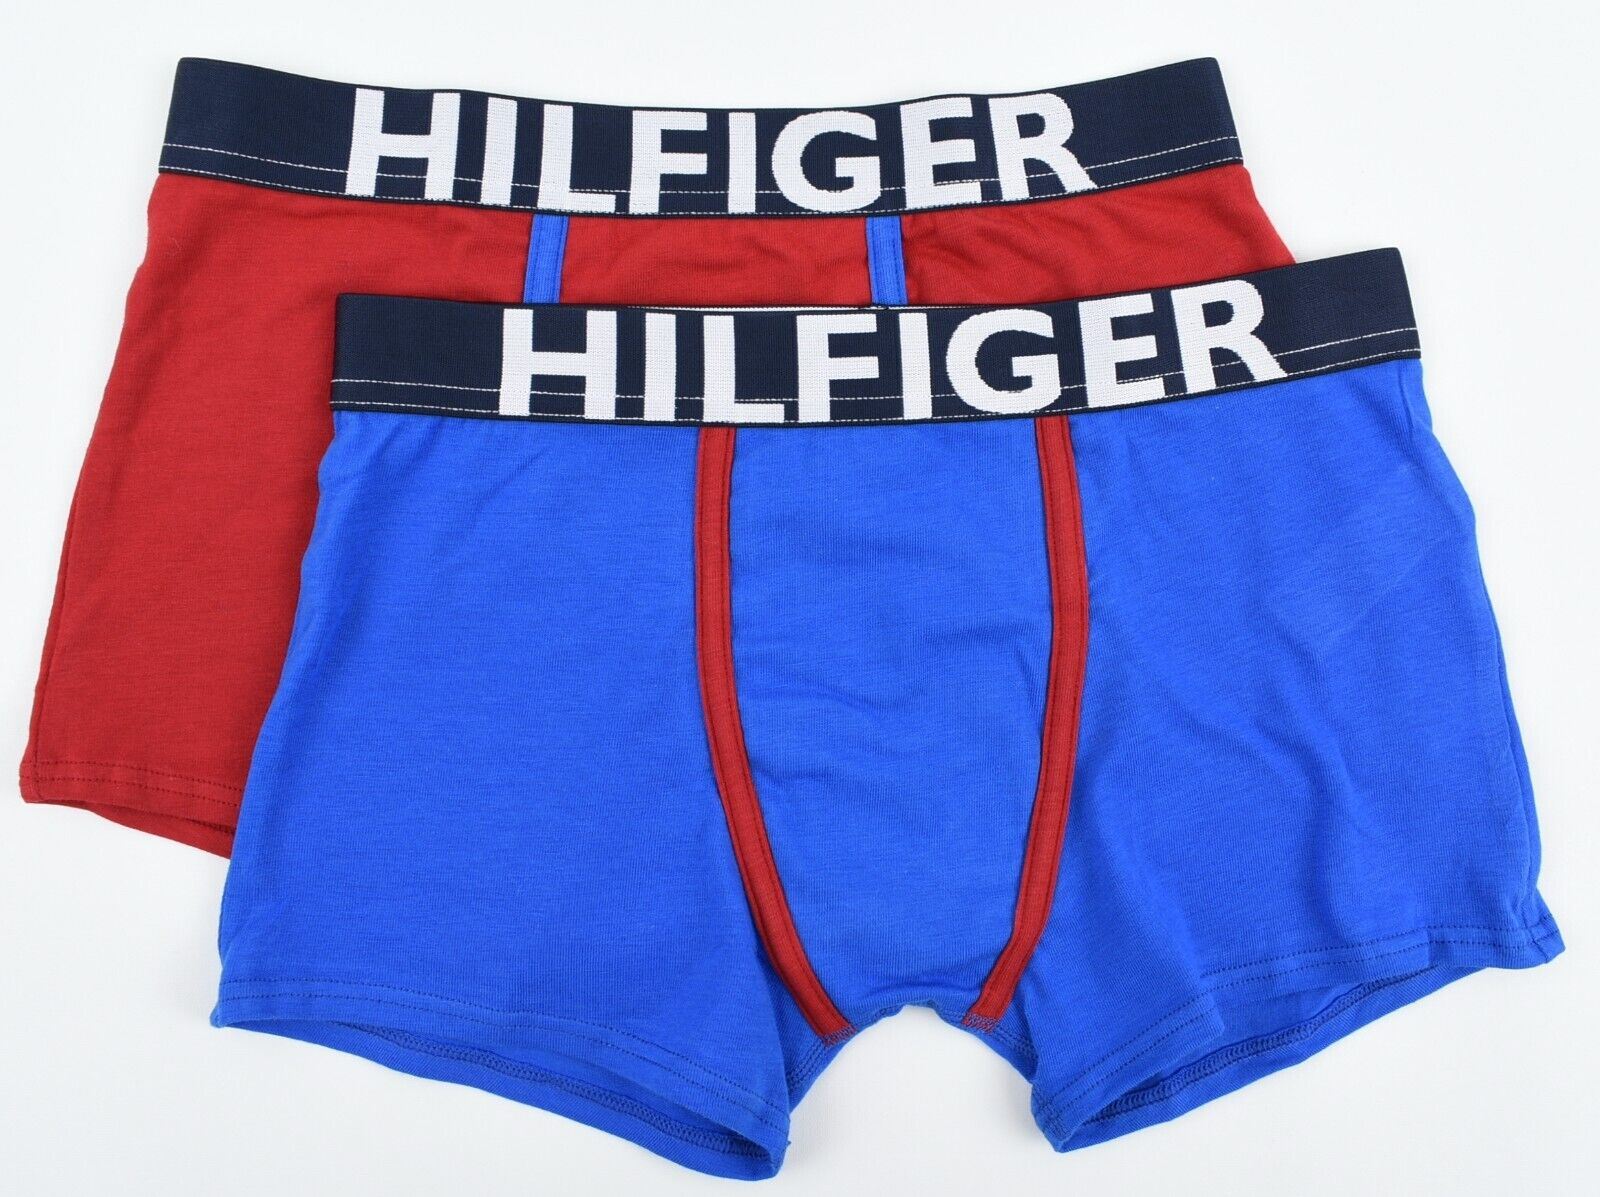 TOMMY HILFIGER Boys' 2-pk Boxer Trunks, Red & Blue, size 8-10 years